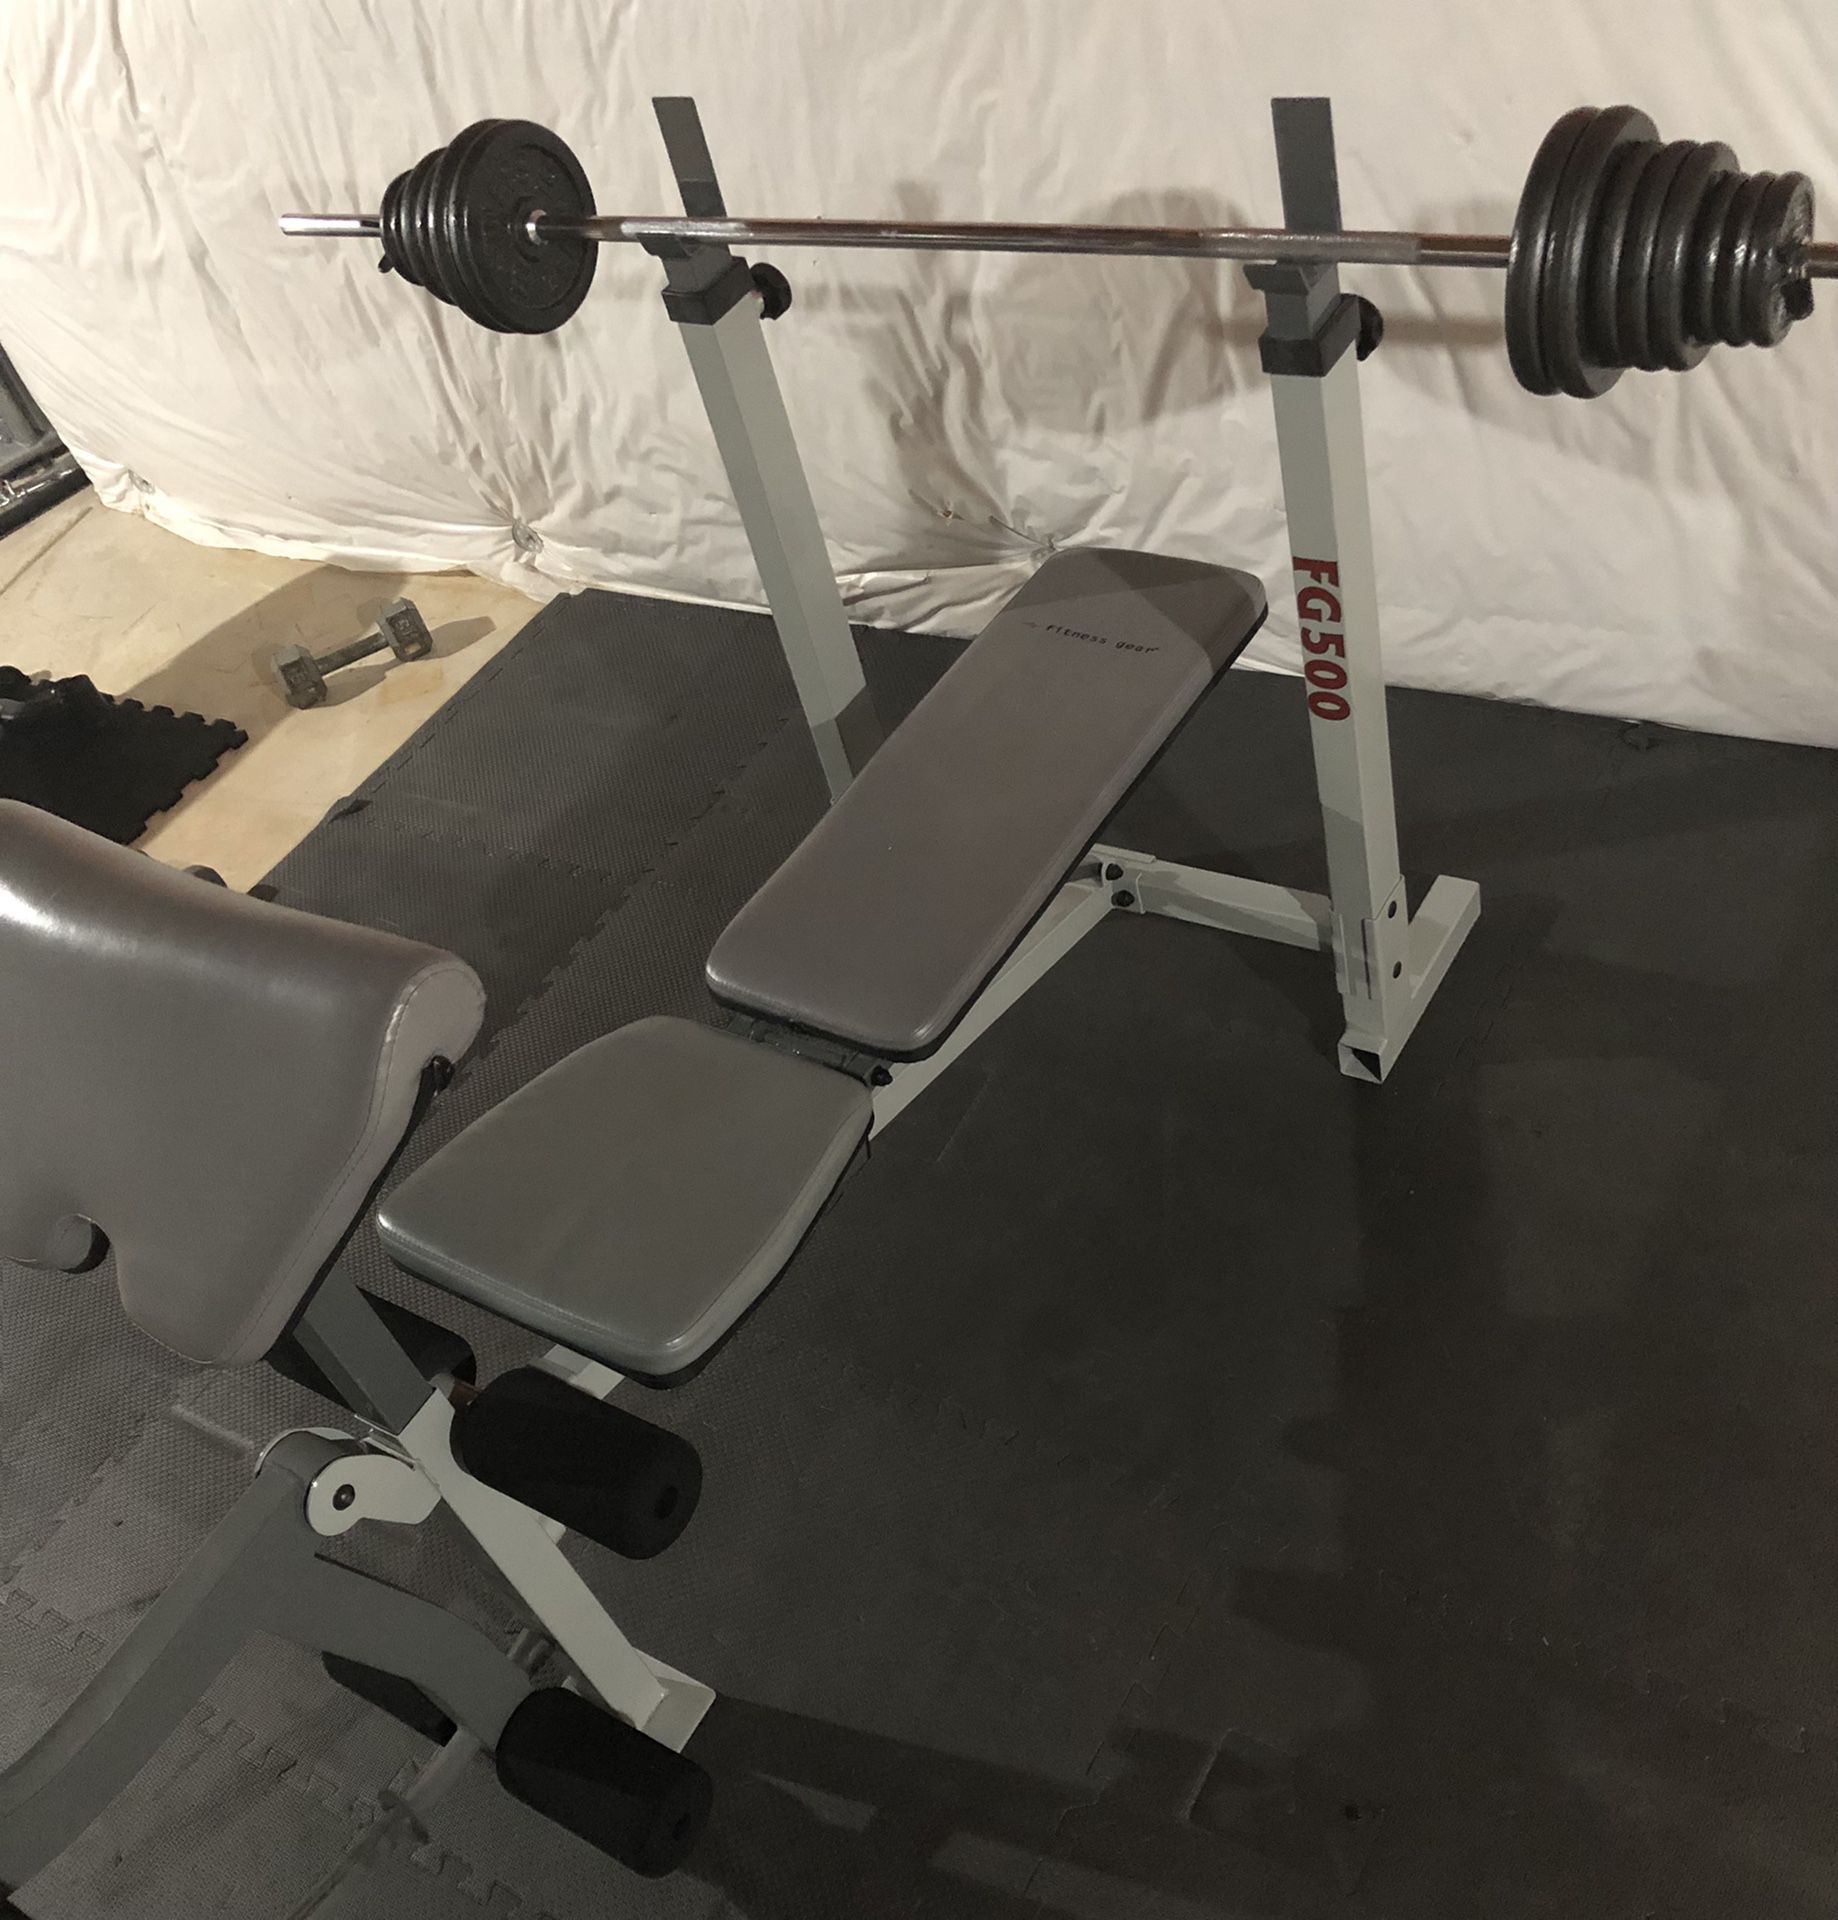 Fitness Gear FG500 weight bench with 4x10, 6x5, 6x2.5 = 16 plates = 85lbs and a bar